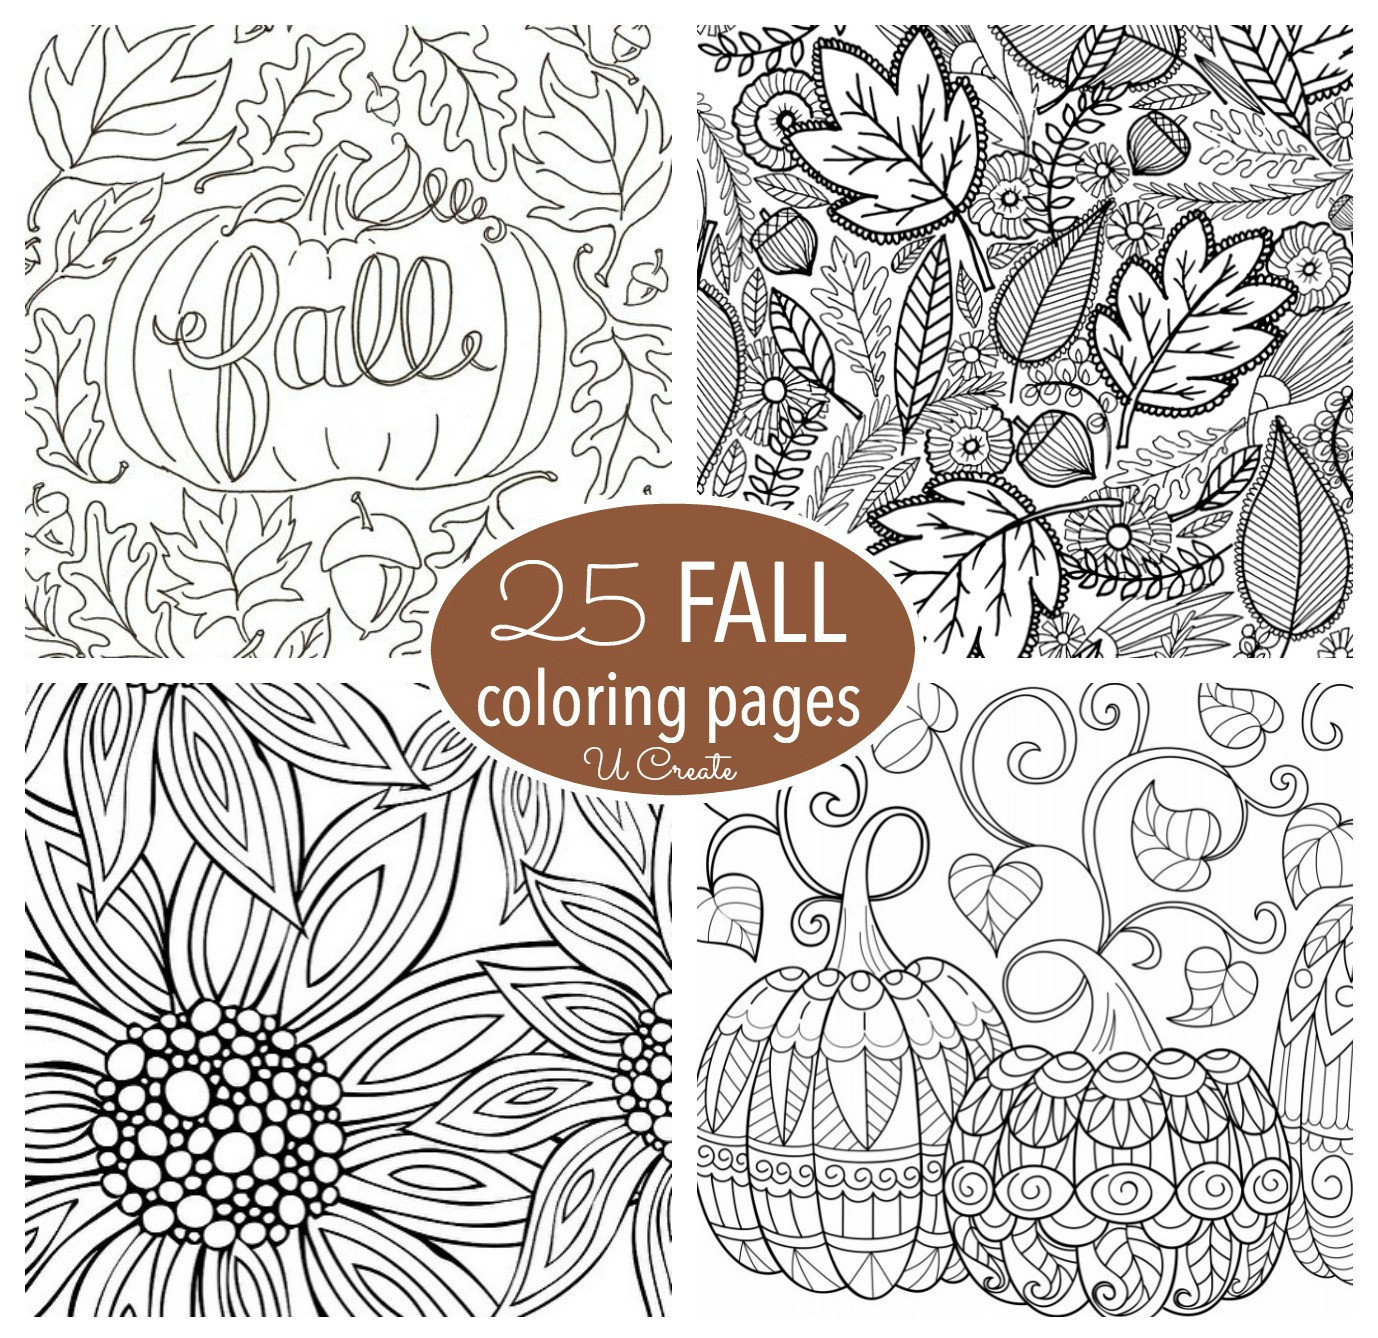 Autumn Coloring Pages For Adults
 Free Fall Adult Coloring Pages U Create